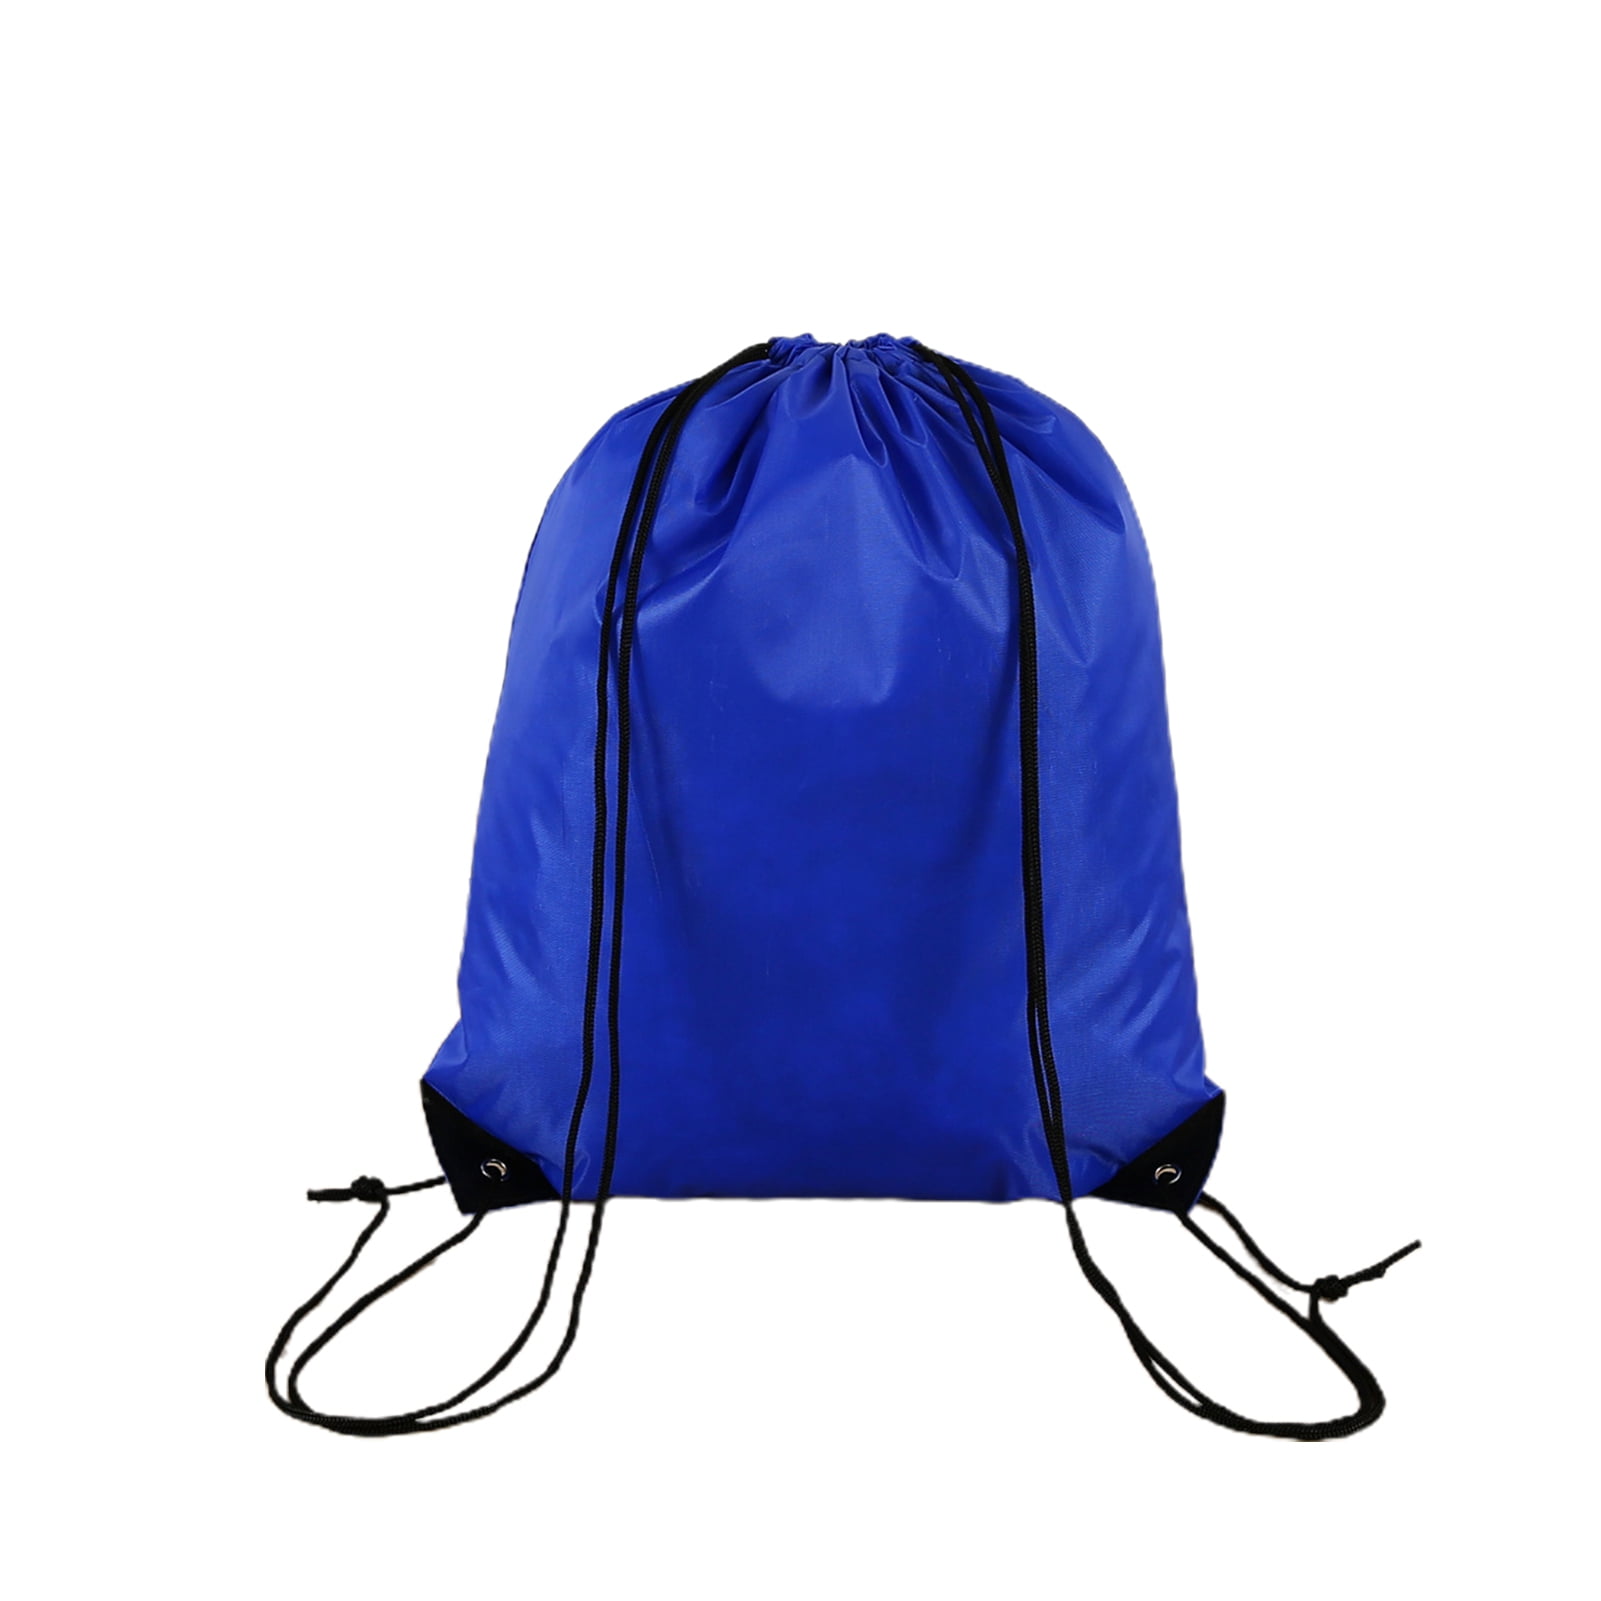 Bag of Holding Drawstring Bag for Sale by jomuxc